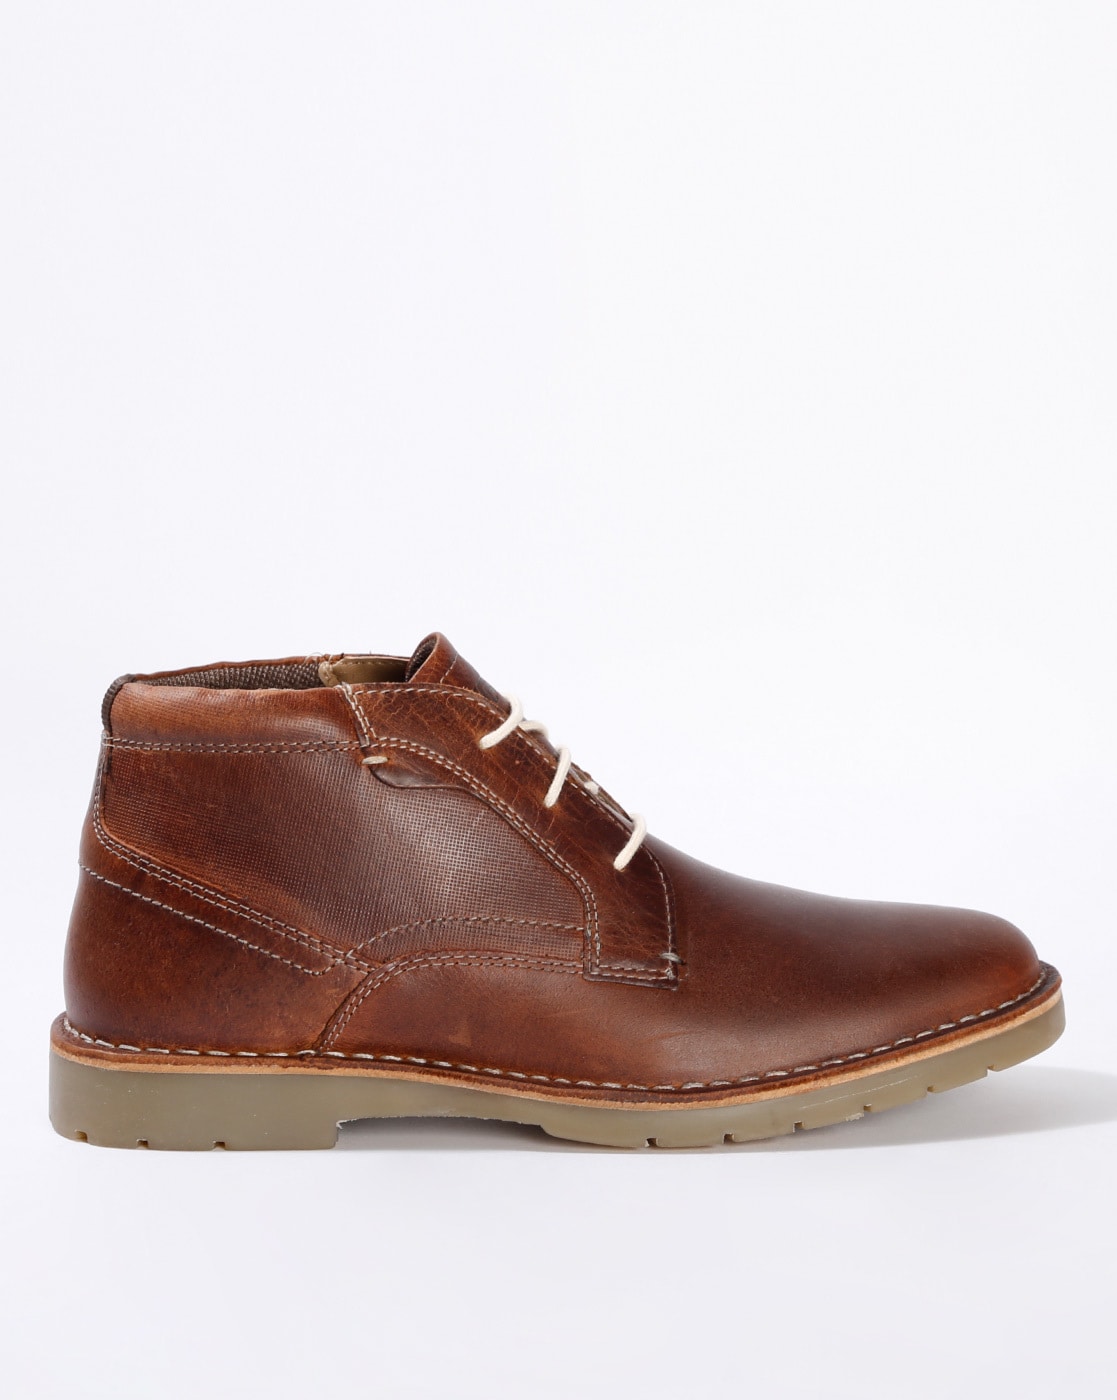 Buy Boots Men by RED TAPE Online Ajio.com